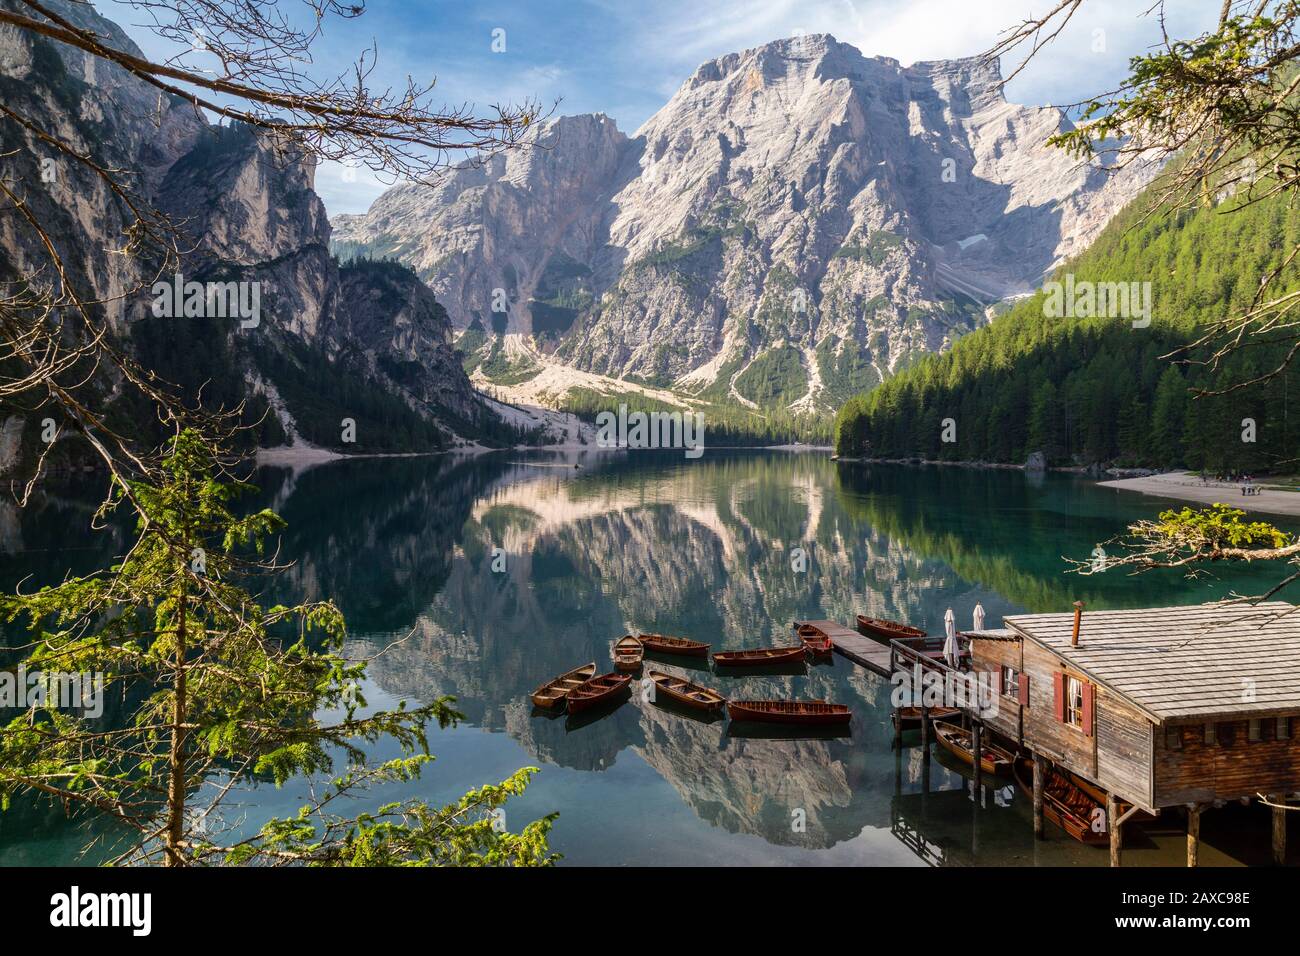 Uniquely placed boats, very touristy on Lago di Braies Stock Photo